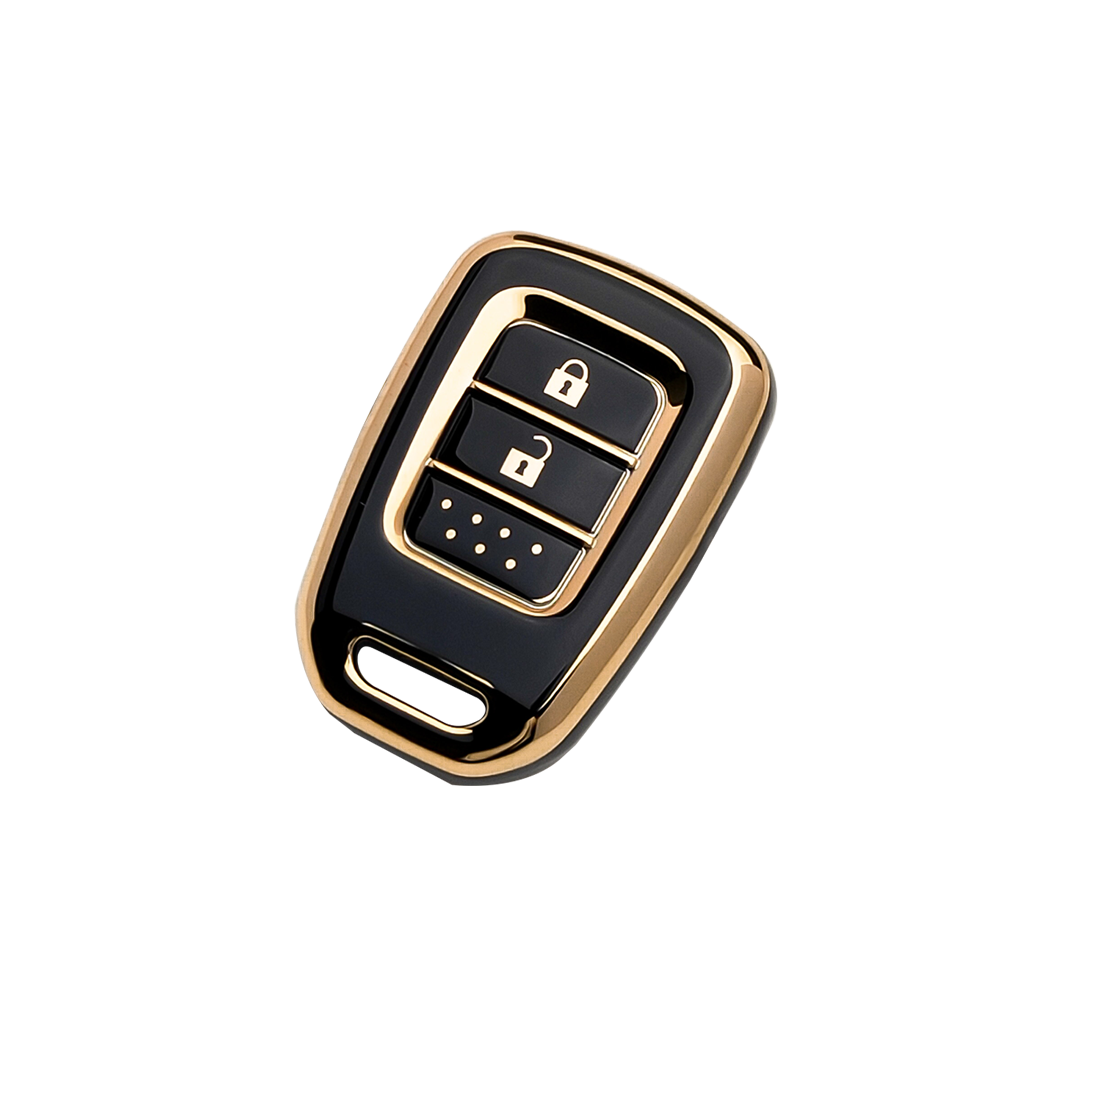 Acto TPU Gold Series Car Key Cover With TPU Gold Key Chain For Honda Amaze